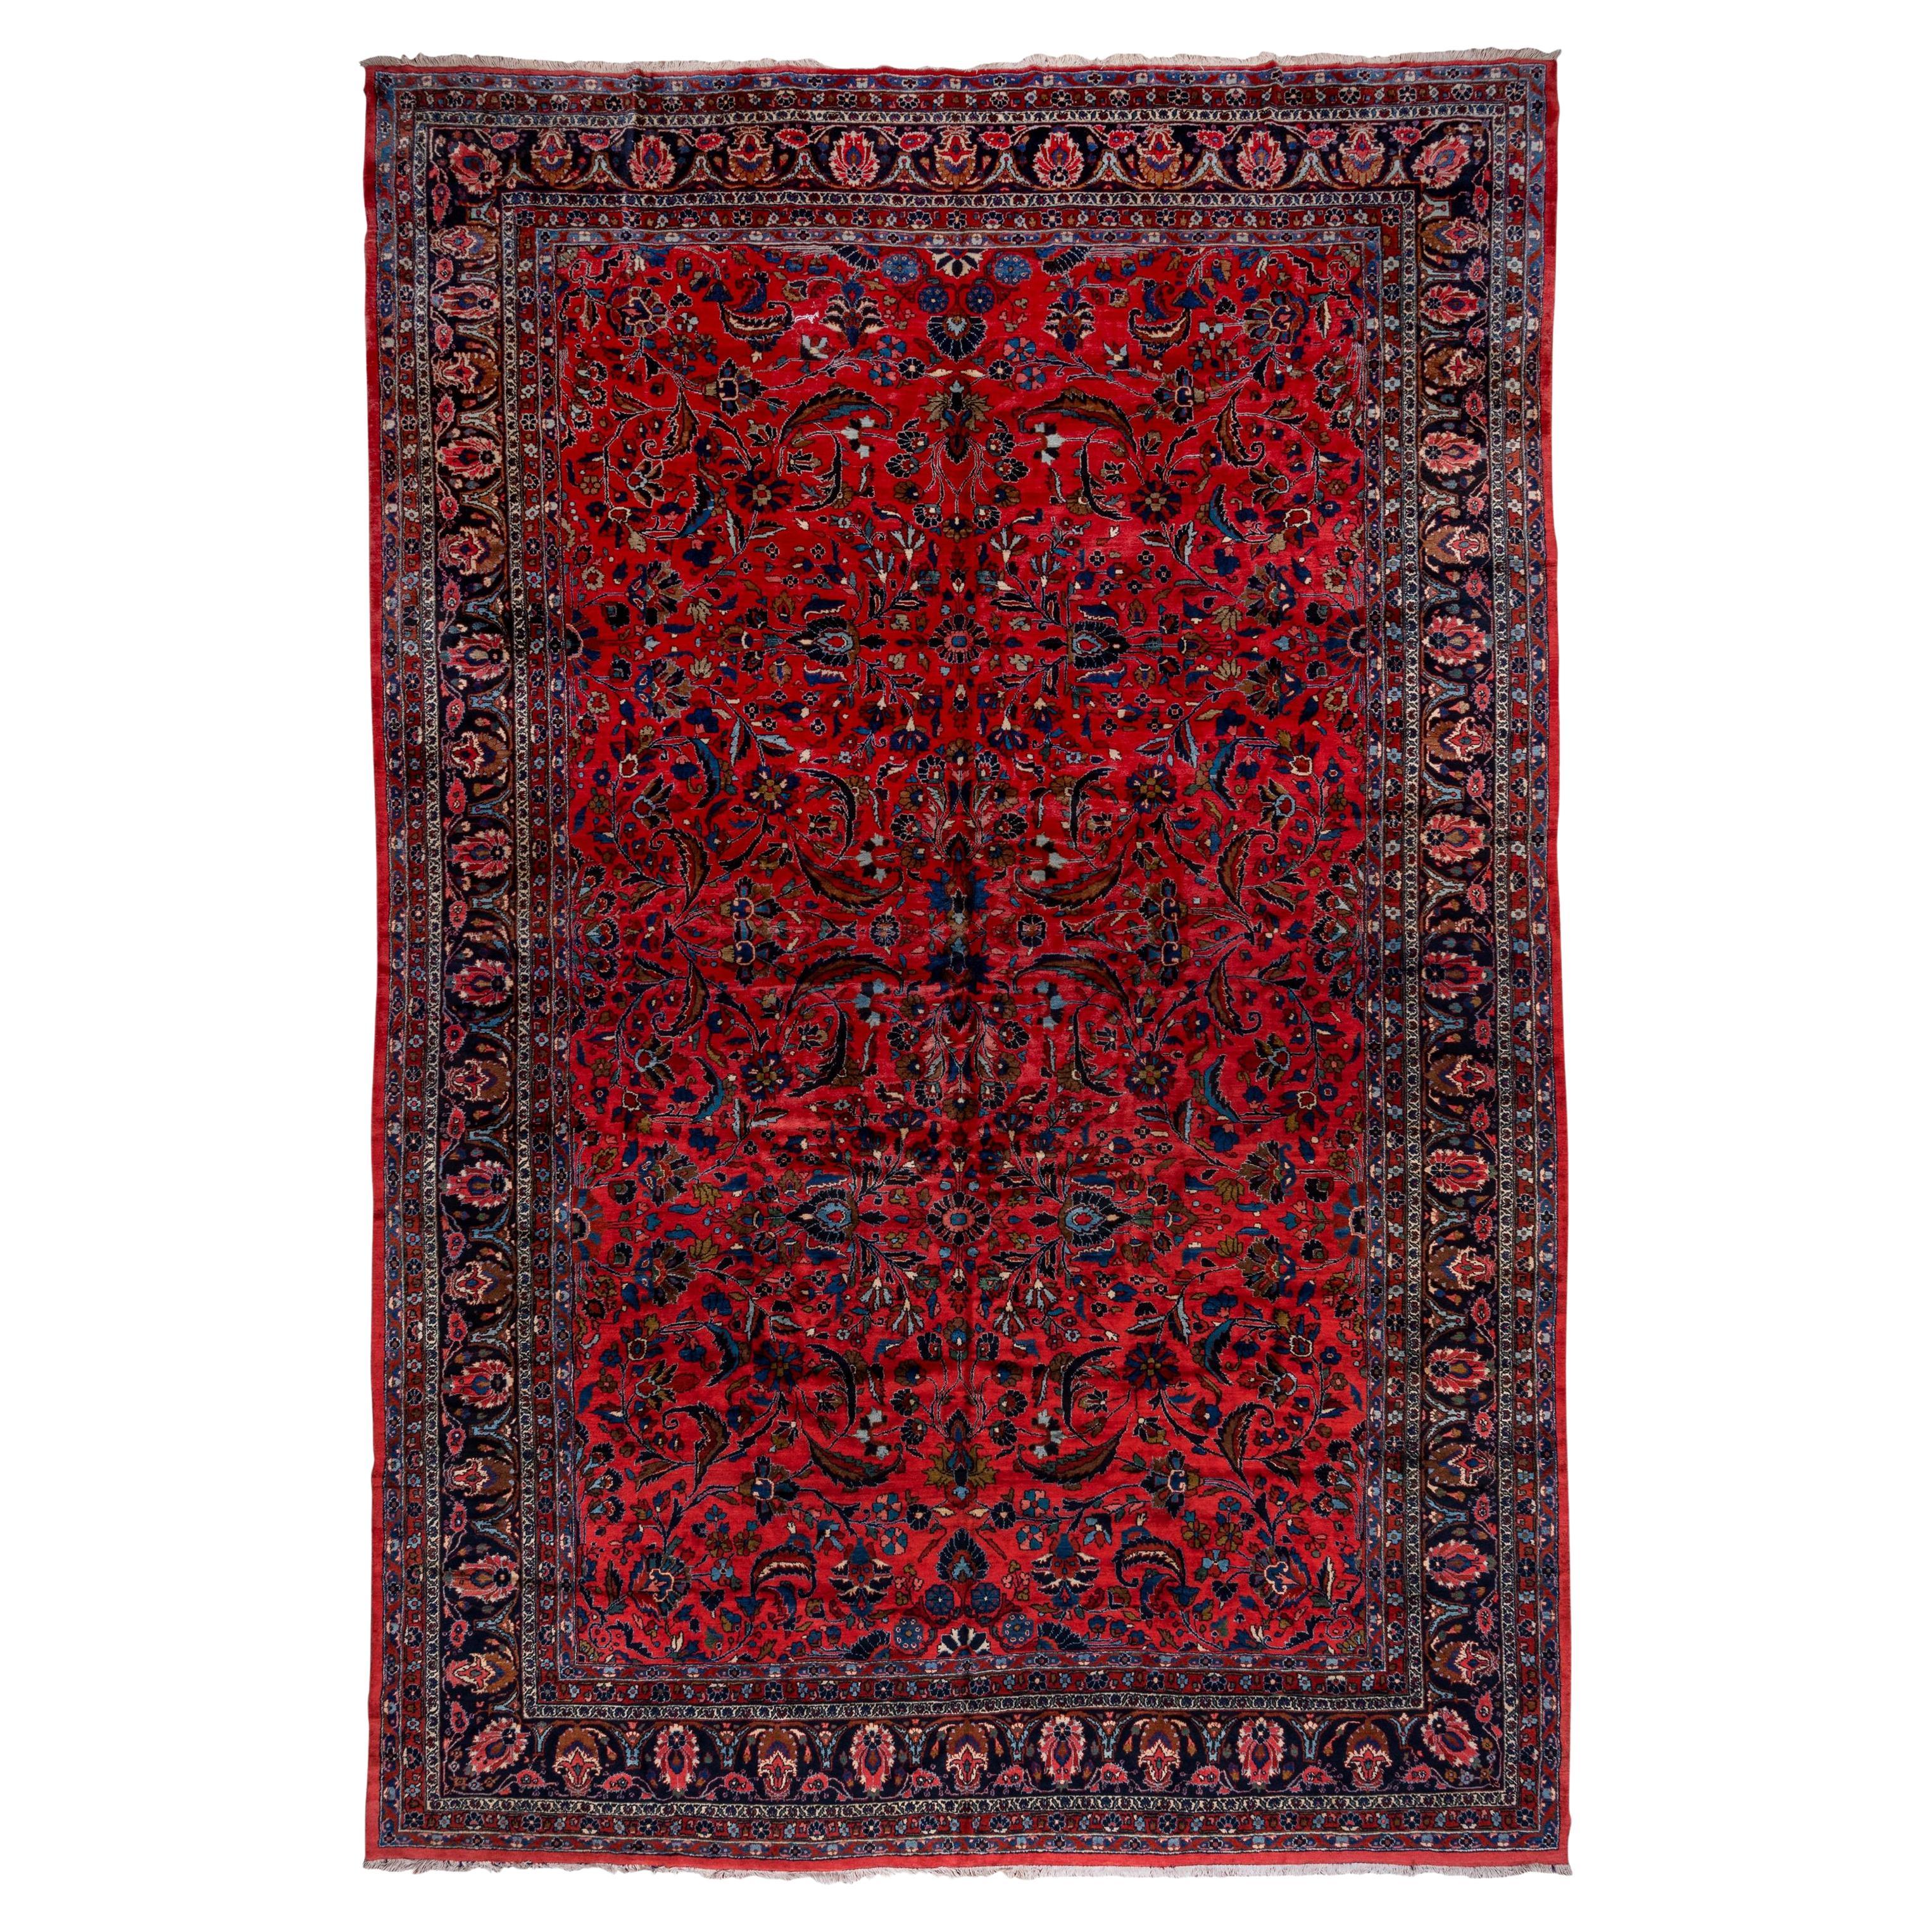 Palace Sized Antique Persian Red Lilian Carpet, circa 1920s For Sale